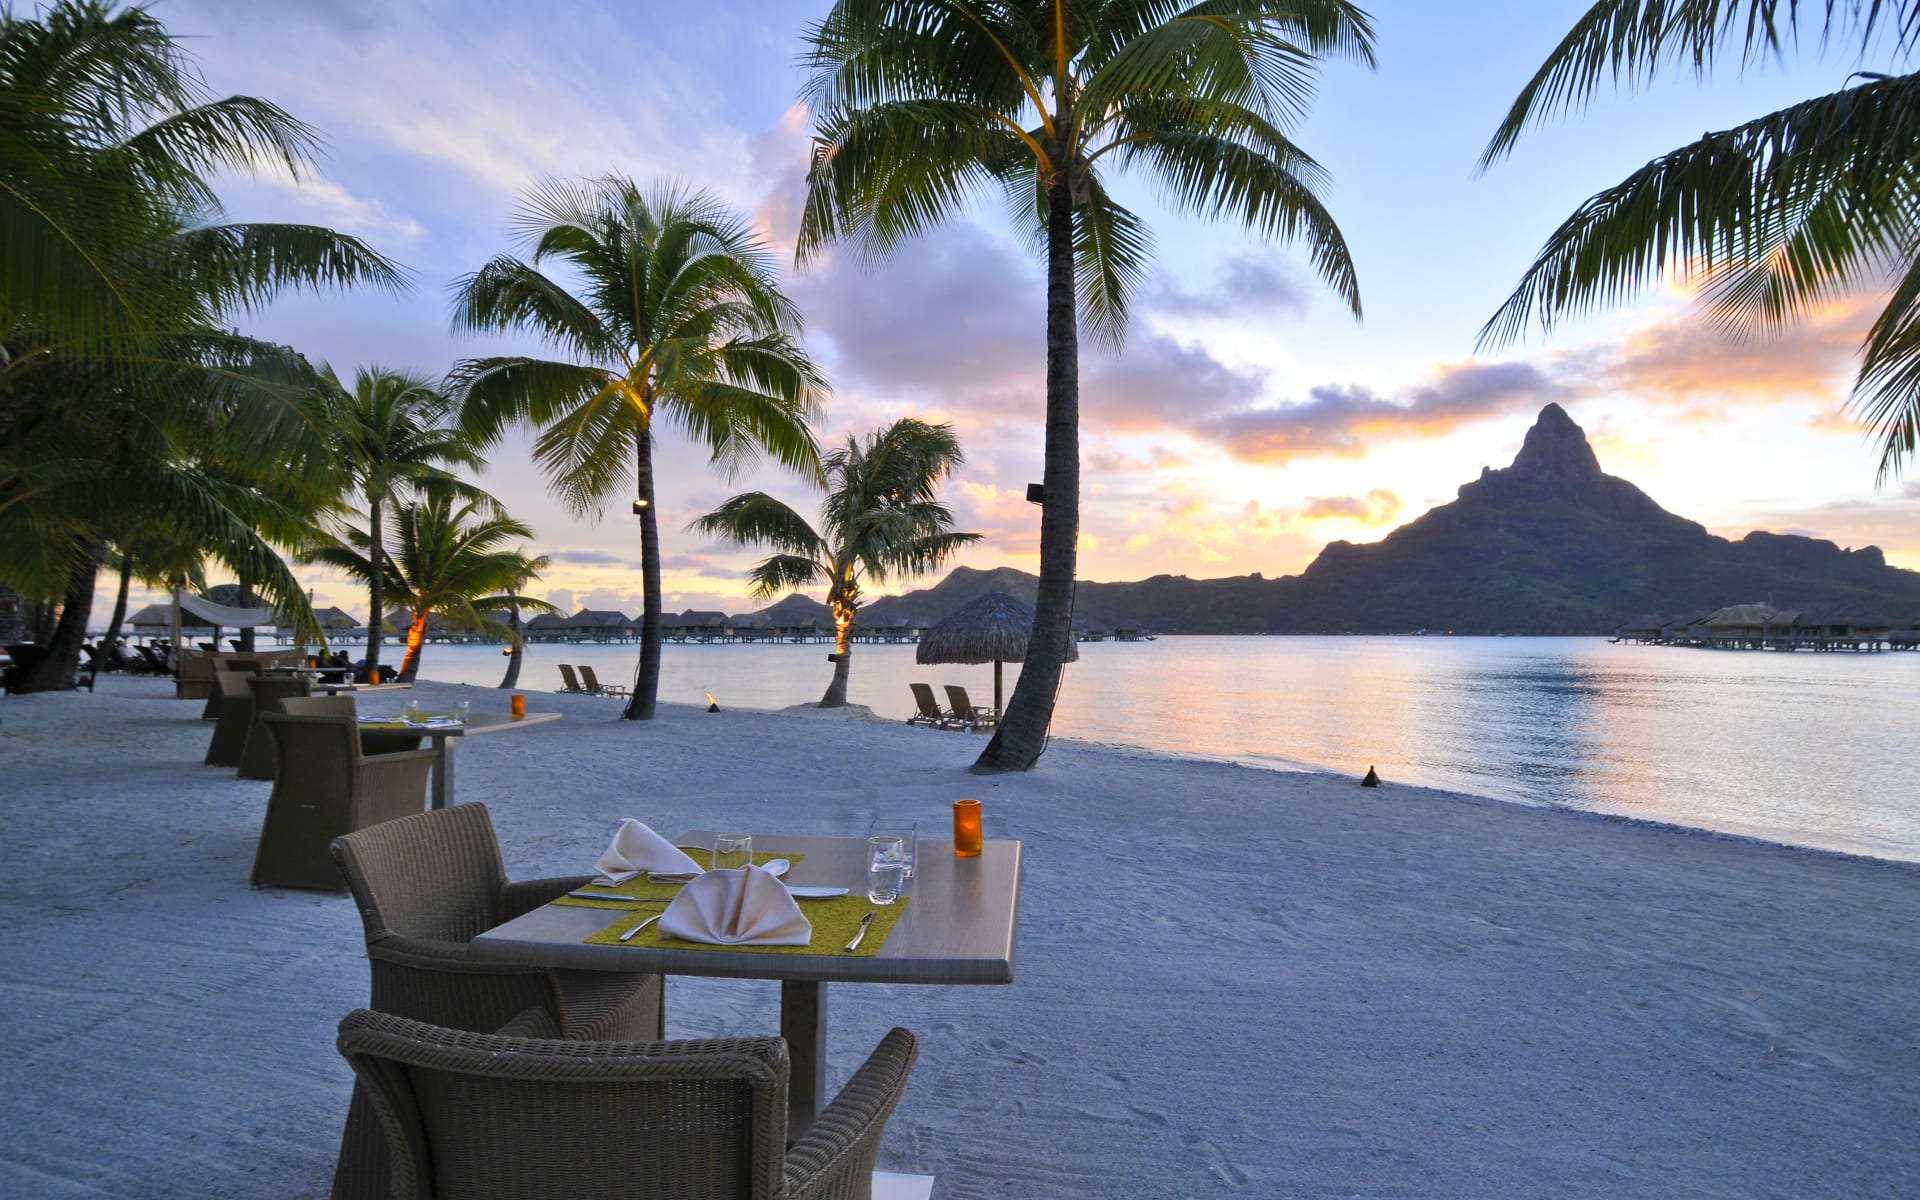 Two-person tables are lined on the beach, overlooking the ocean, mountains and palm trees. 